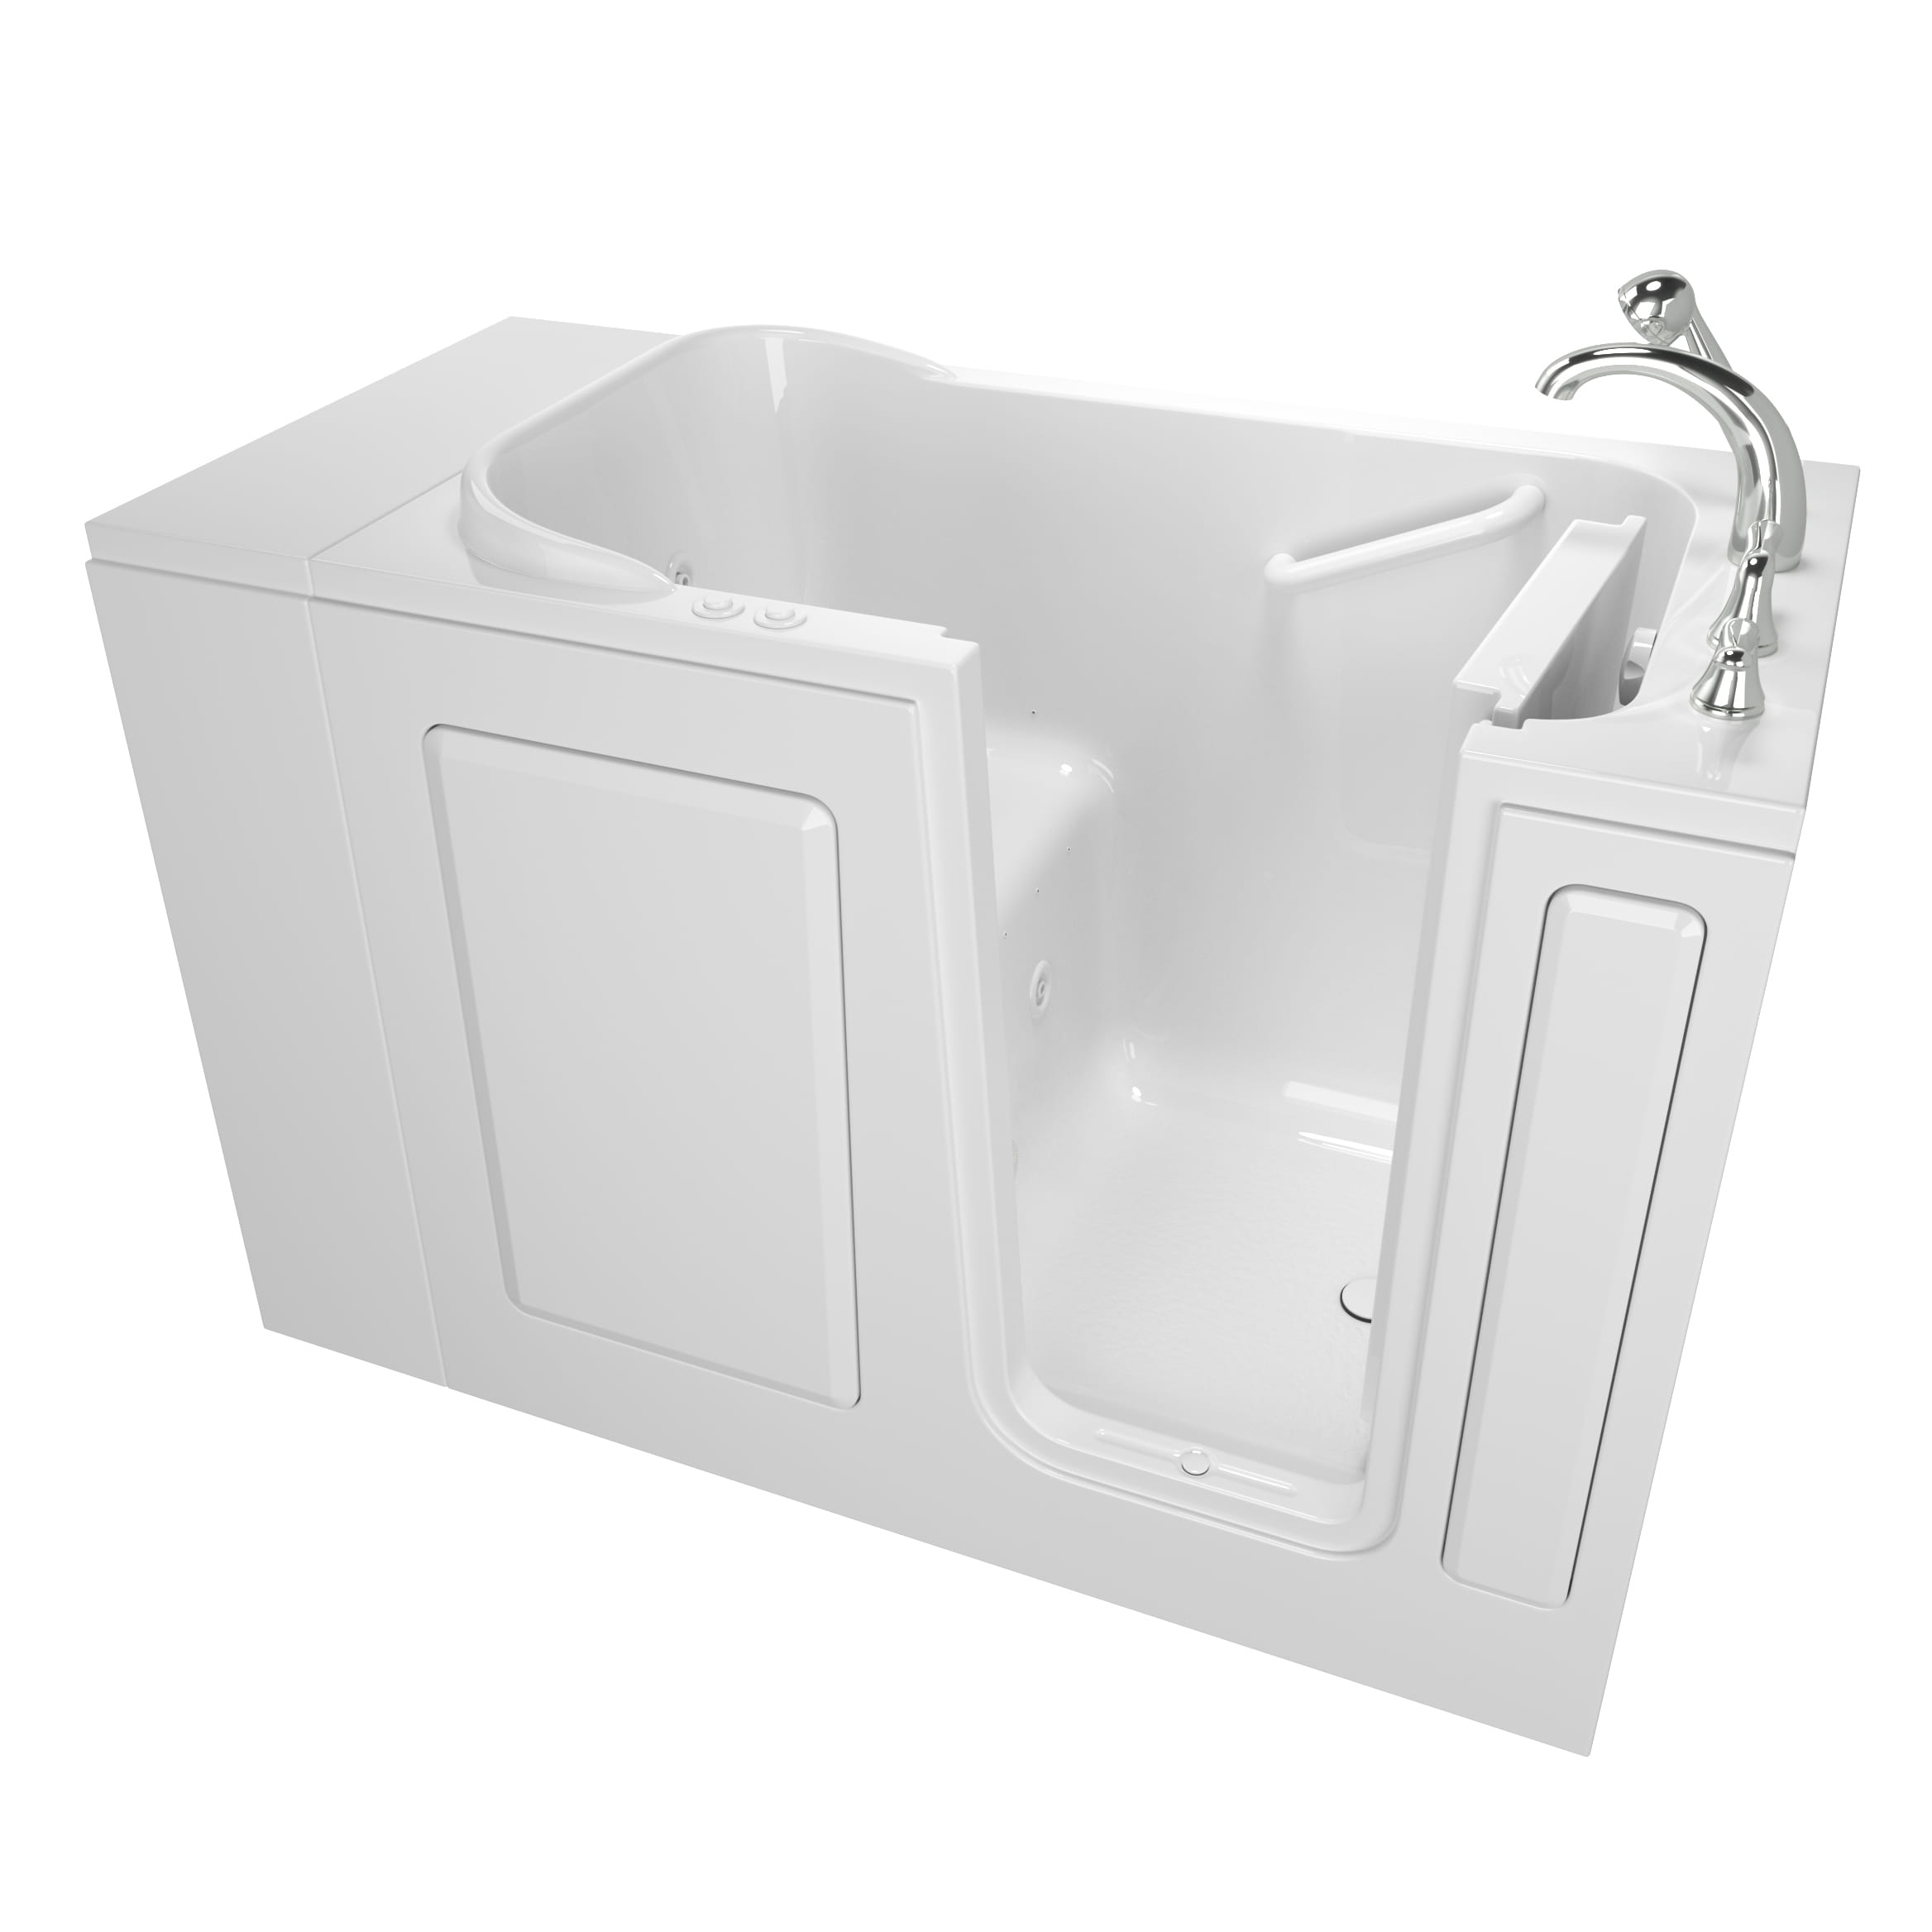 Gelcoat Entry Series 48 x 28-Inch Walk-In Tub With Combination Air Spa and Whirlpool Systems – Right-Hand Drain With Faucet